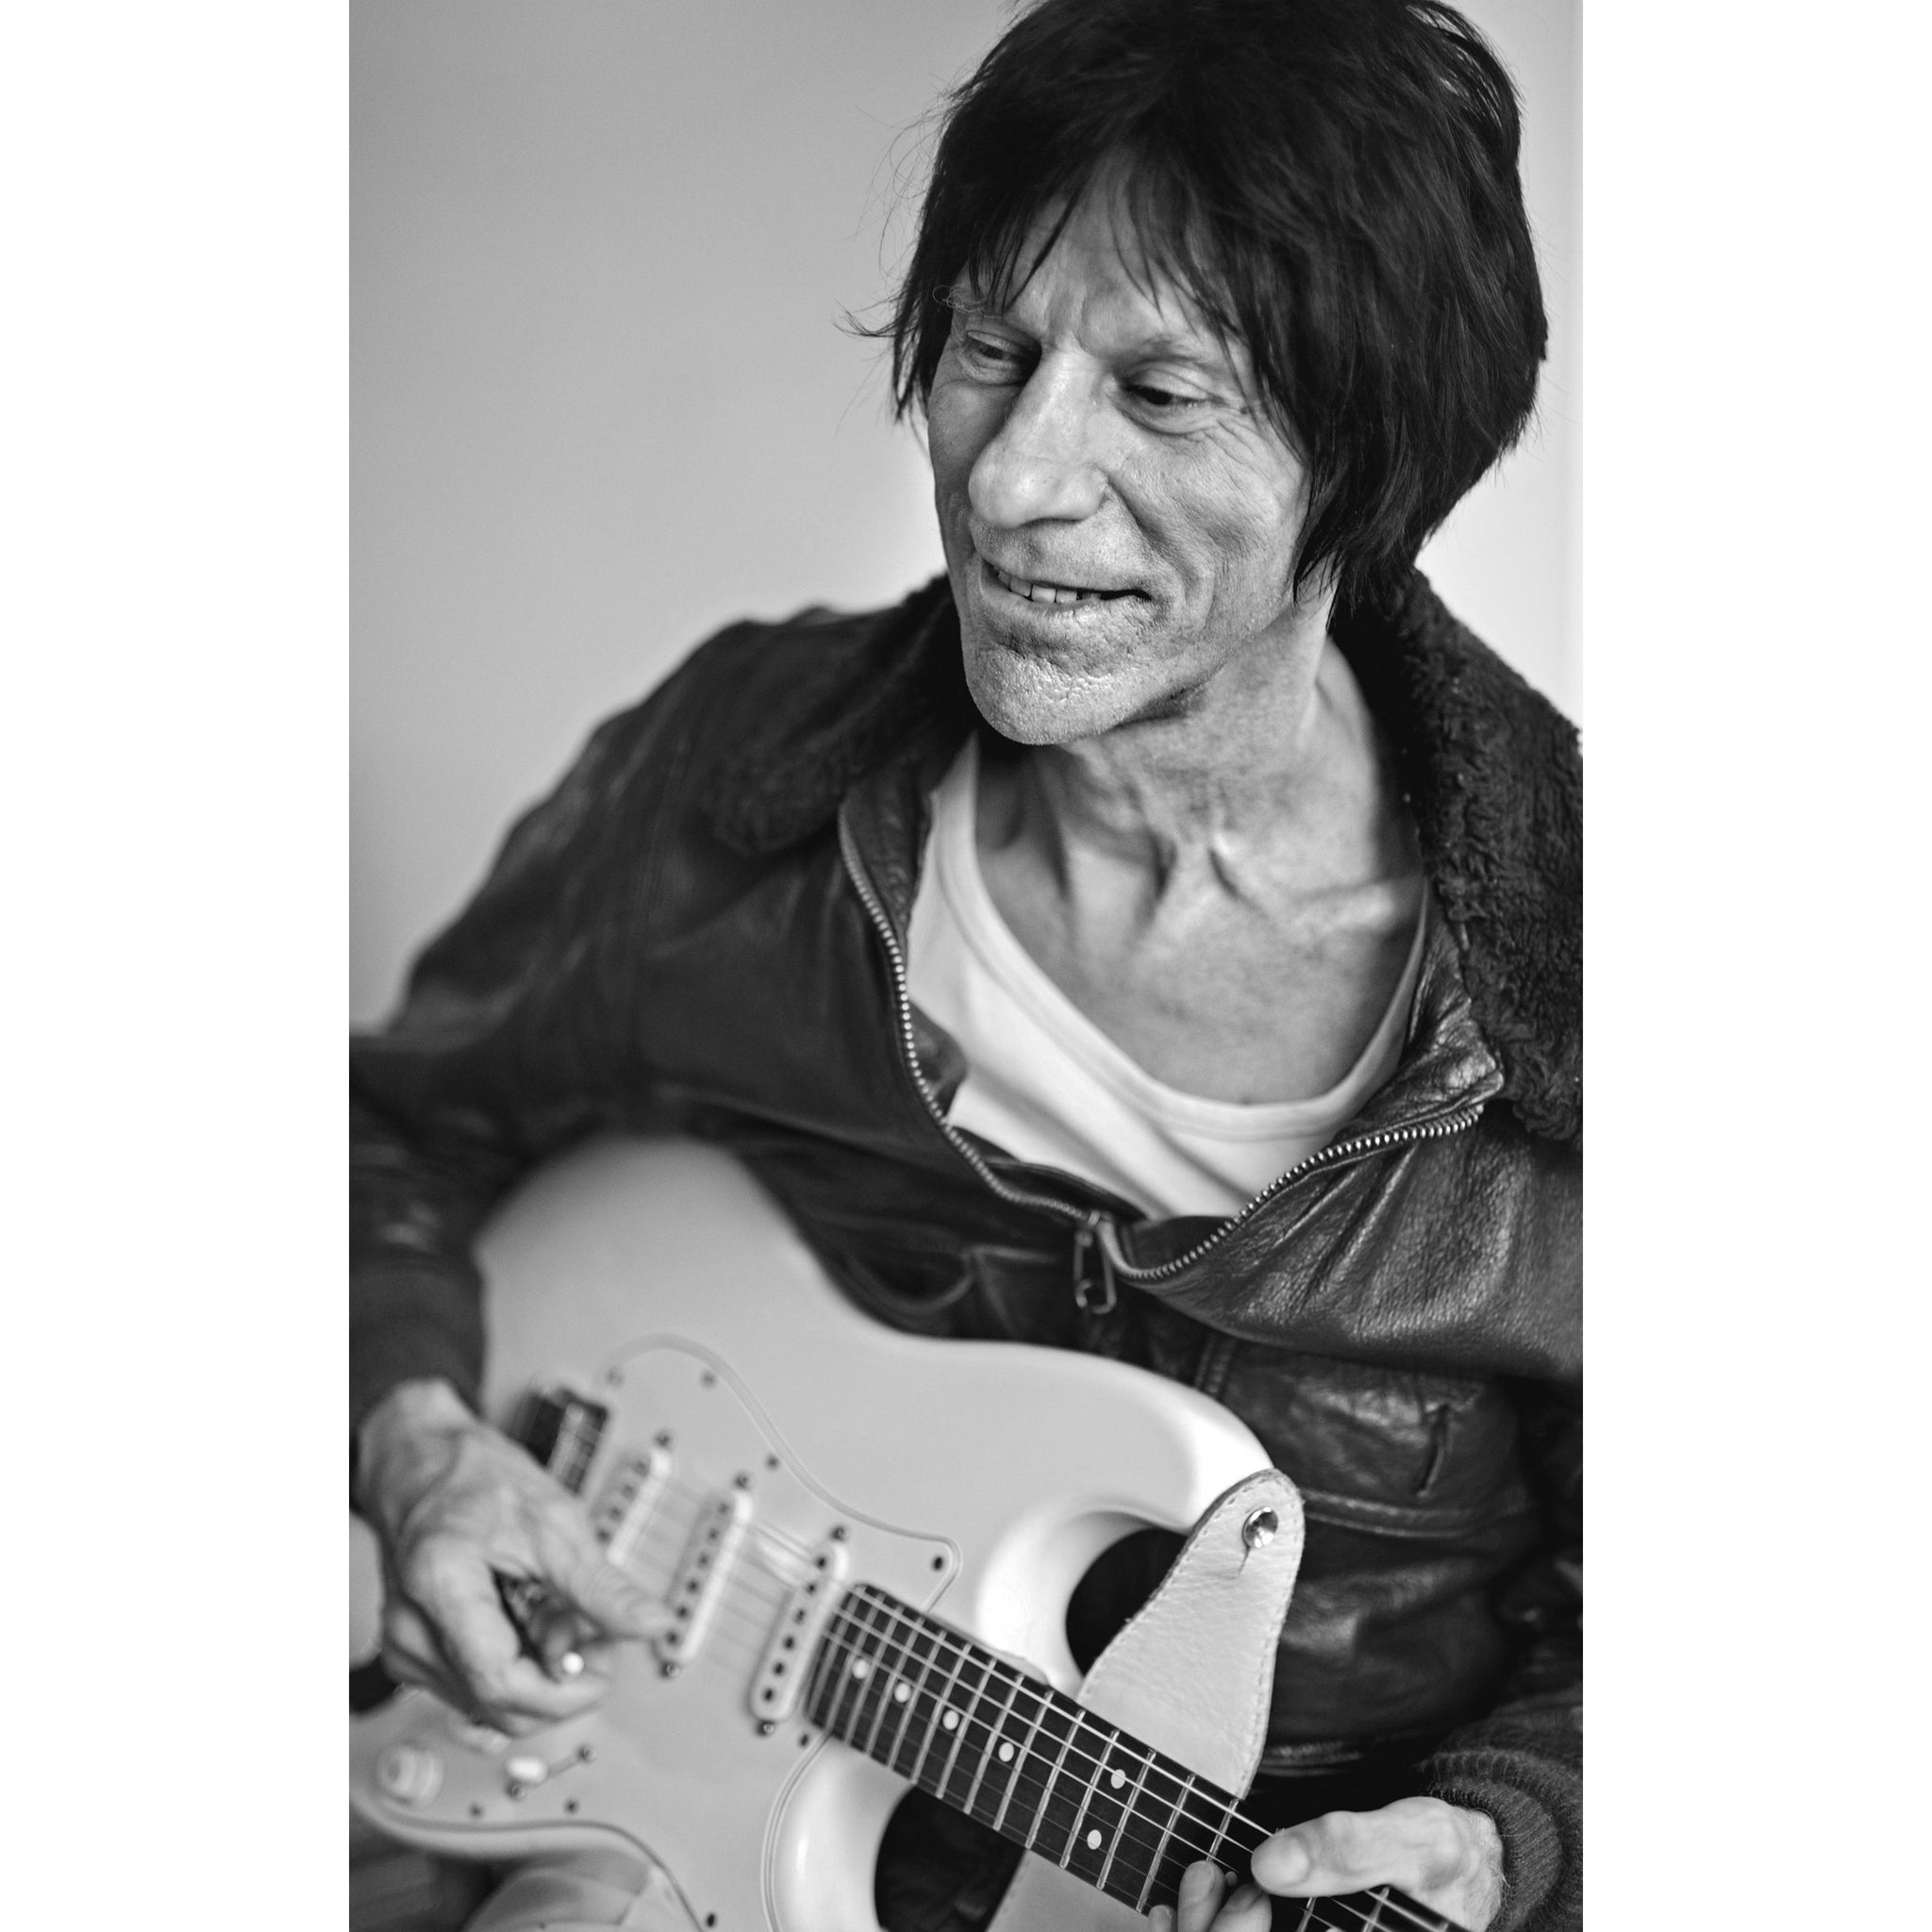 Jeff Beck - Scarlet Page - Limited Edition Prints